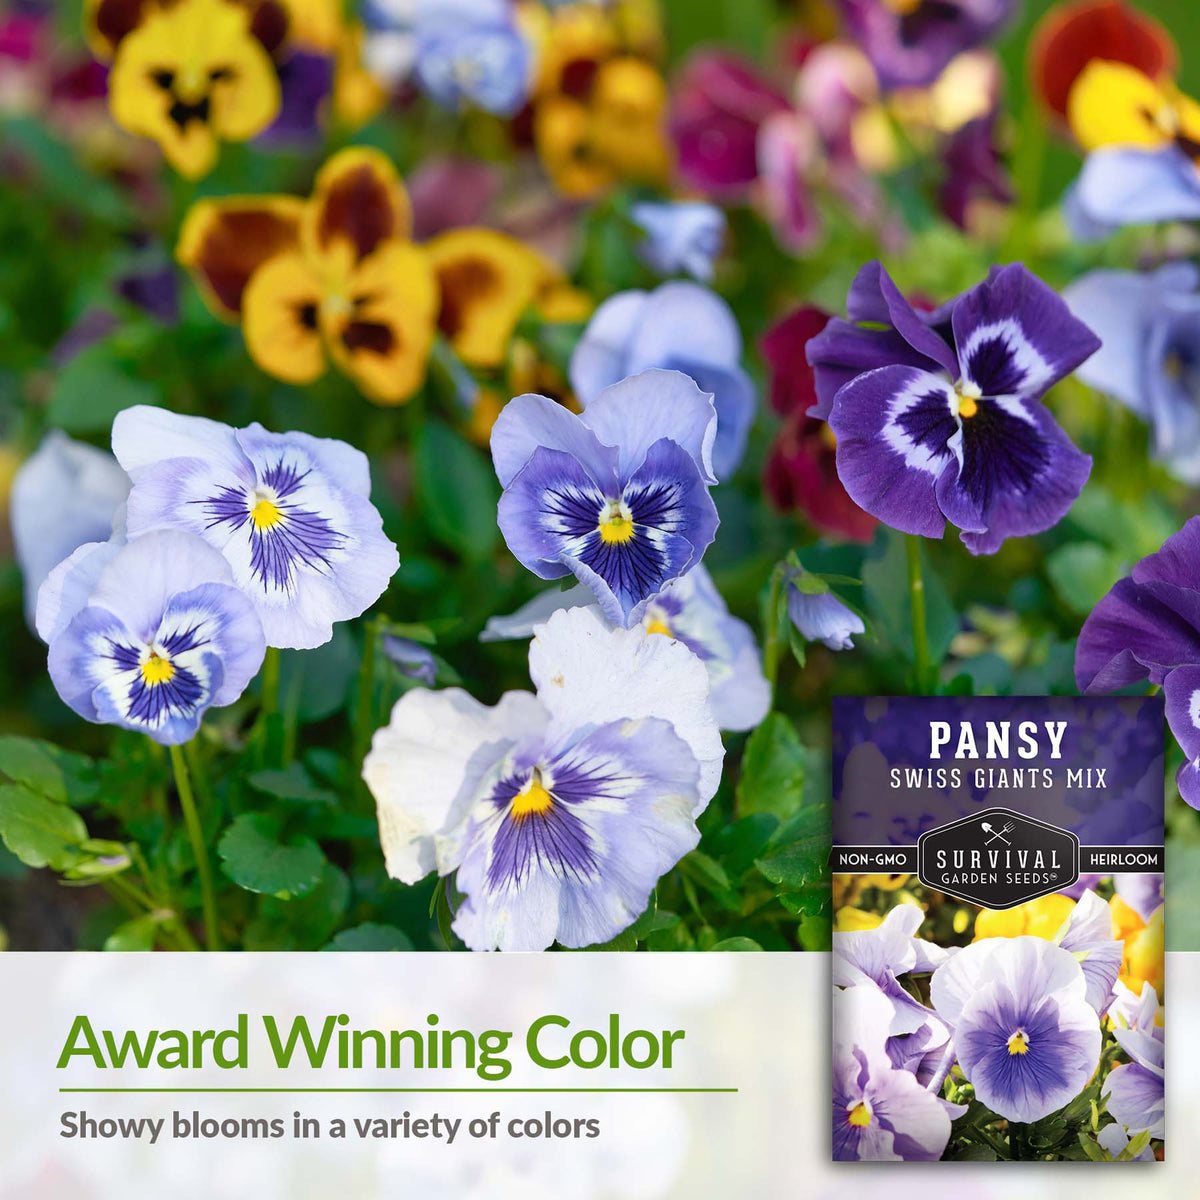 Pansy blooms in a variety of colors